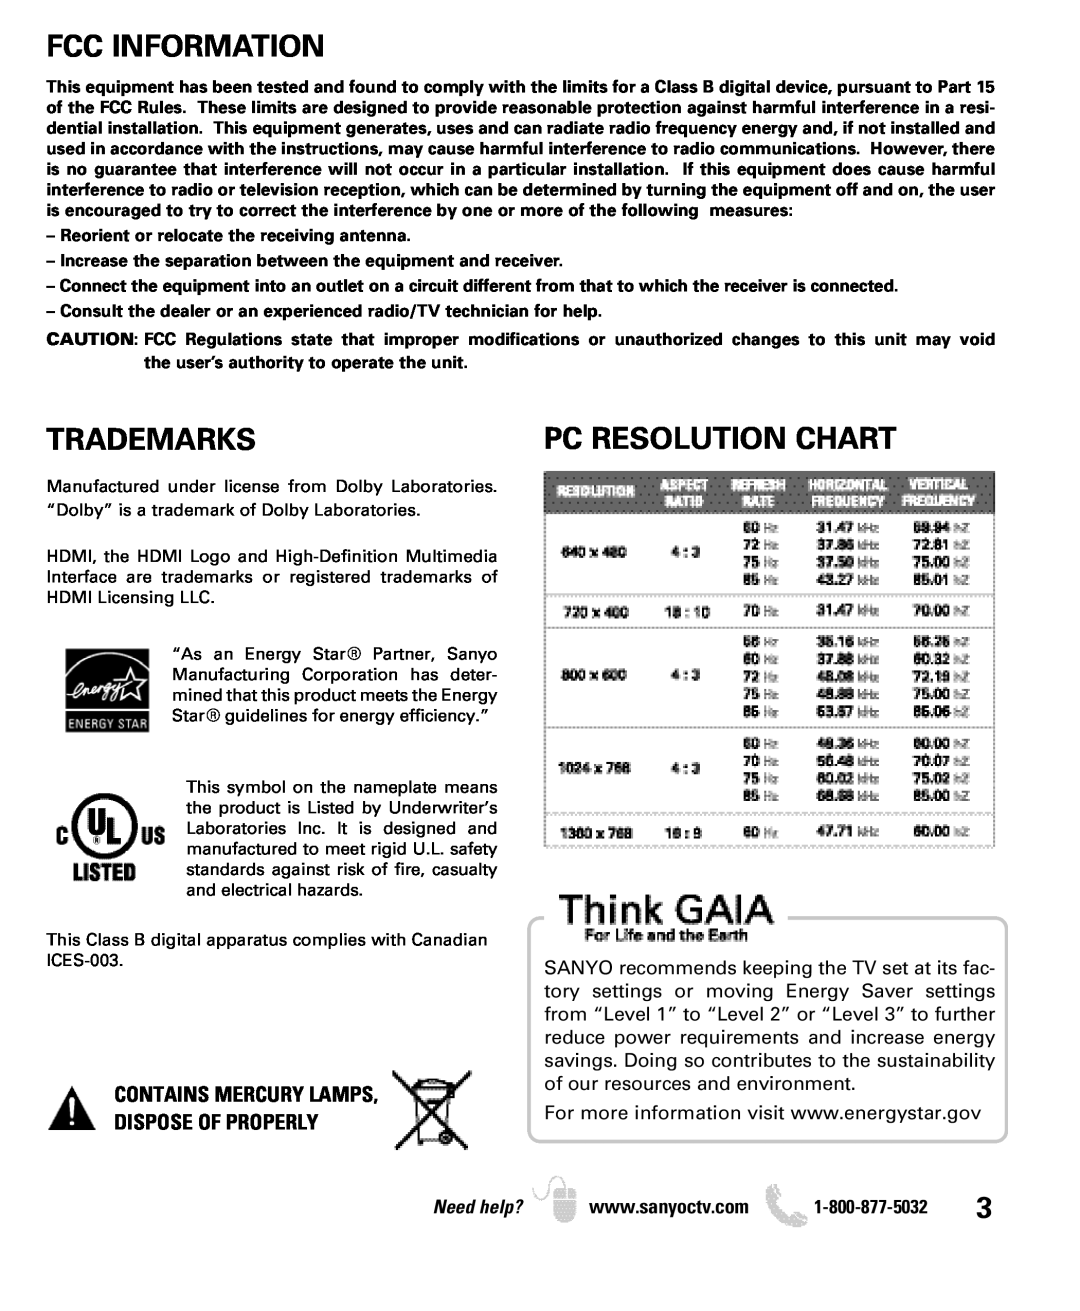 Sanyo DP19649, DP26649 Fcc Information, Trademarks, Pc Resolution Chart, Contains Mercury Lamps Dispose Of Properly 